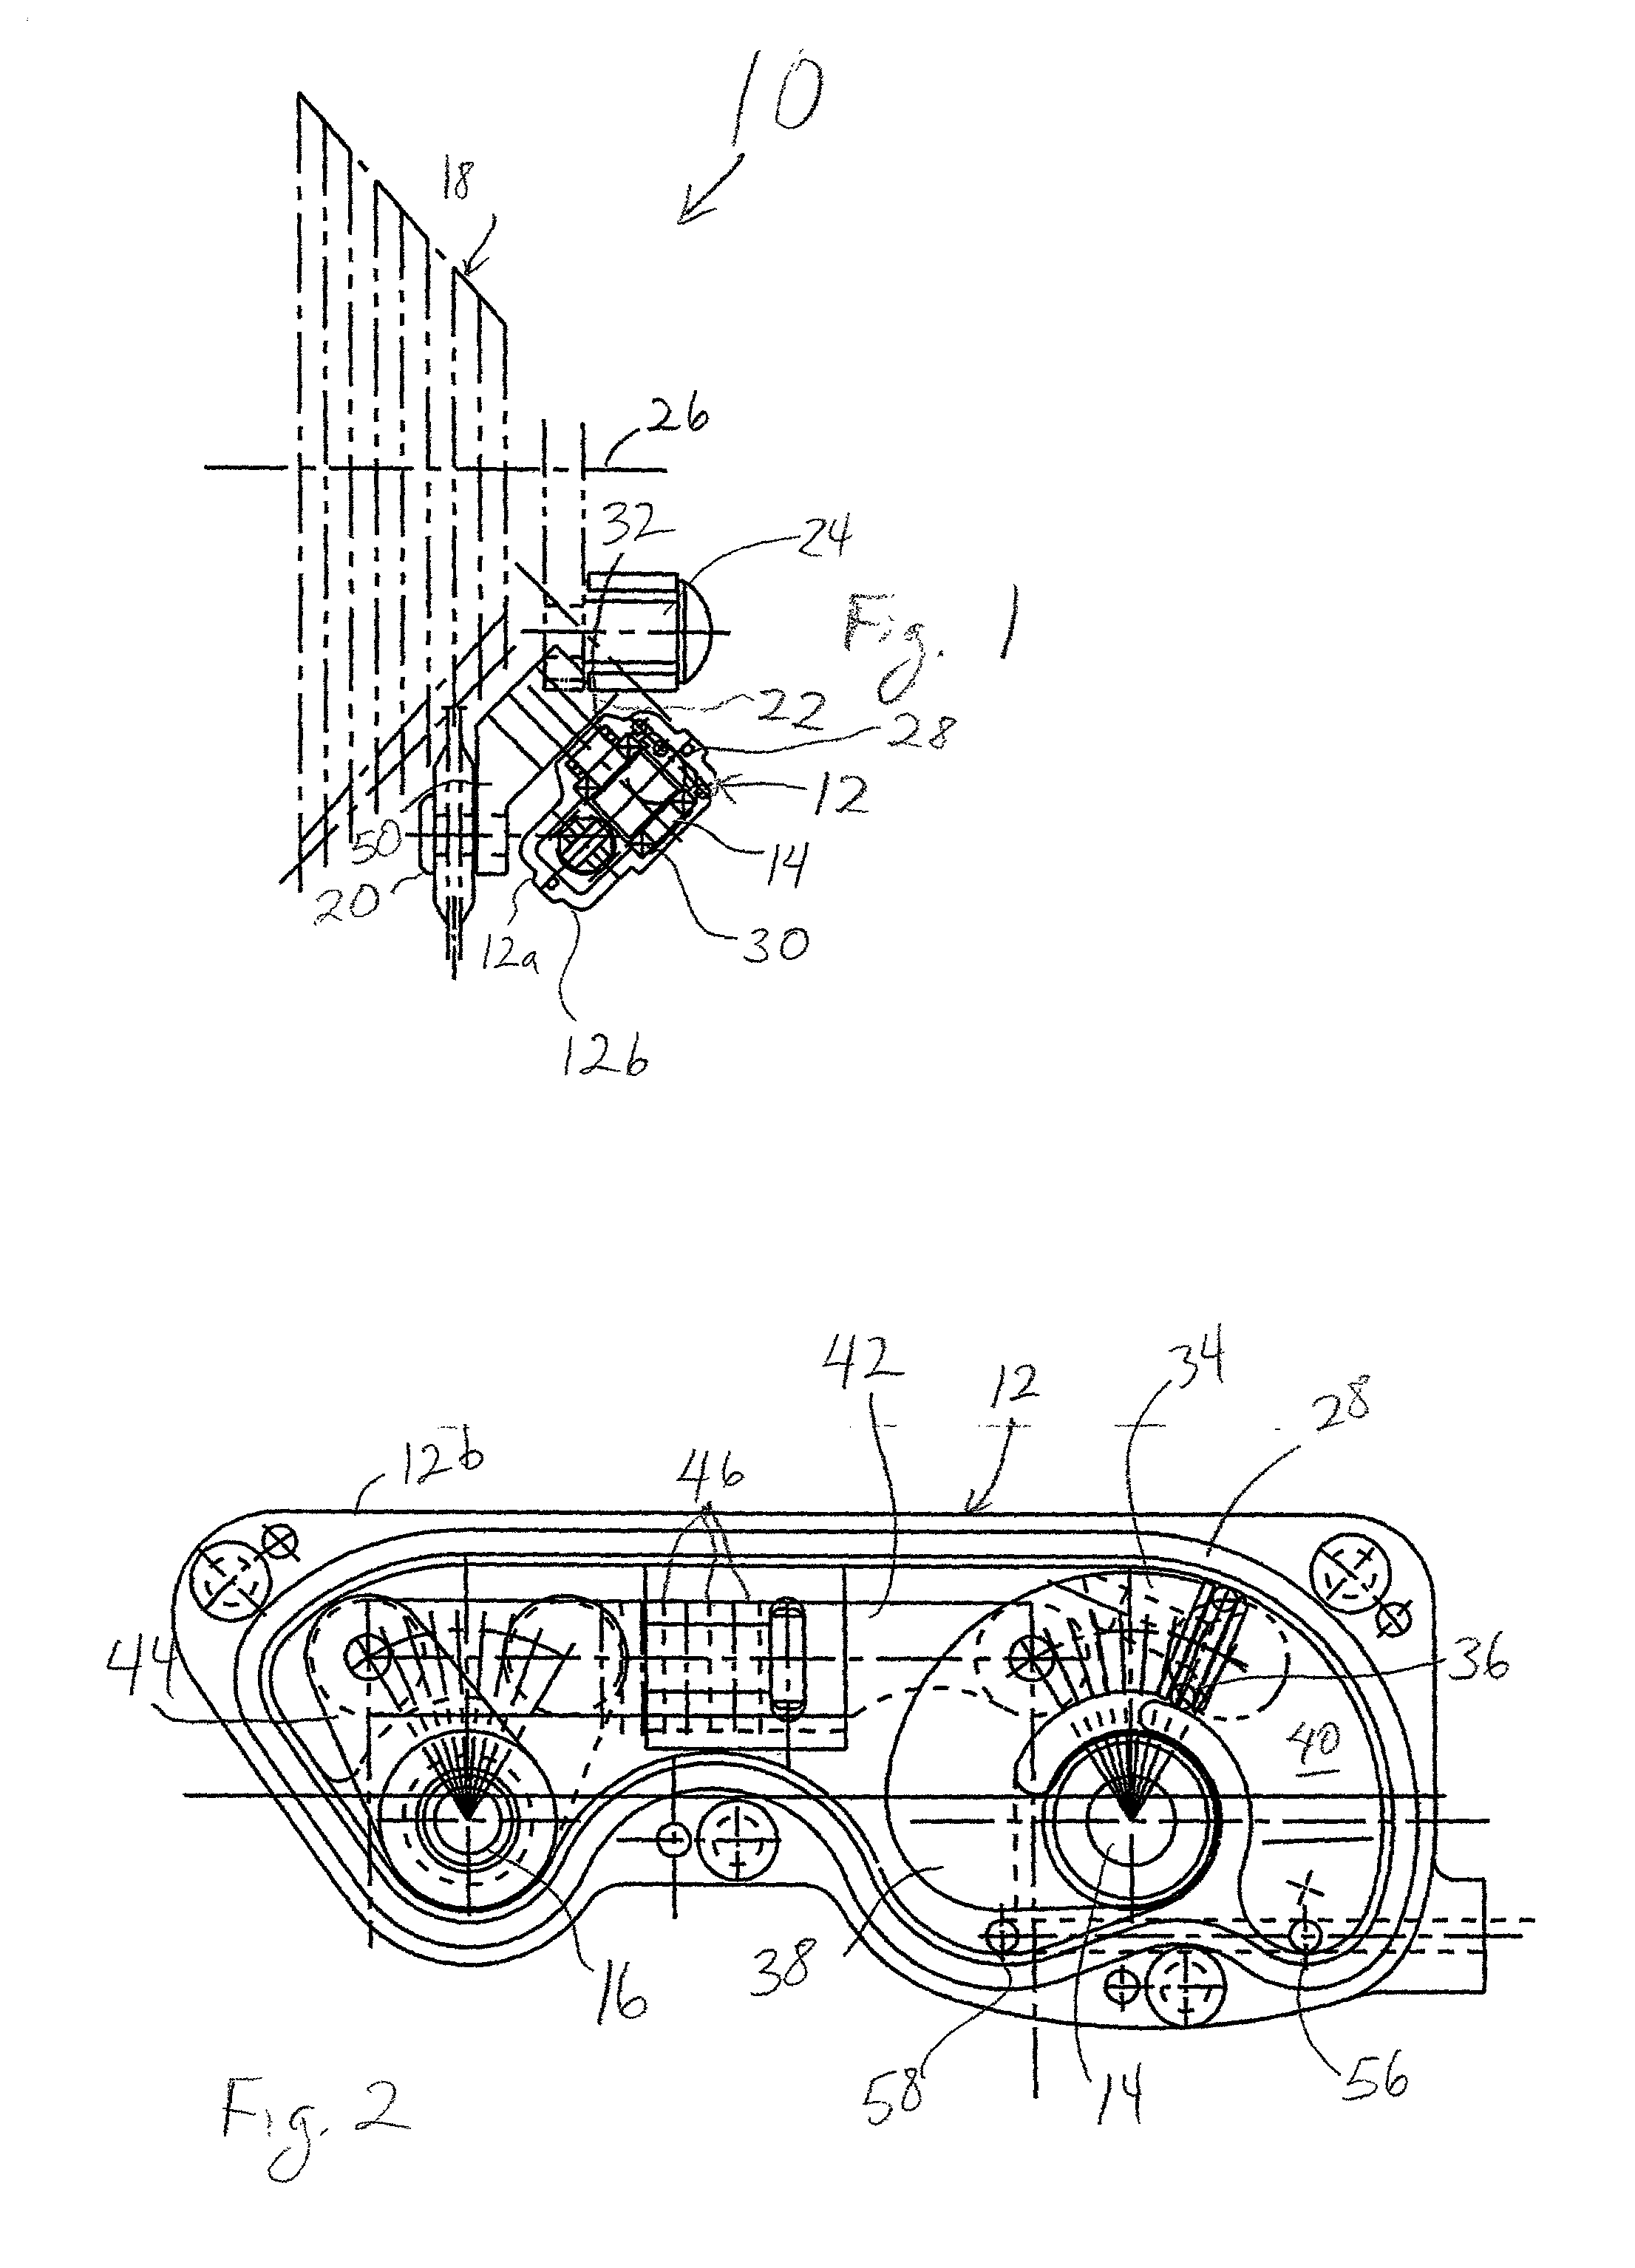 Compact hydraulically-operated derailleur shifting system for bicycles